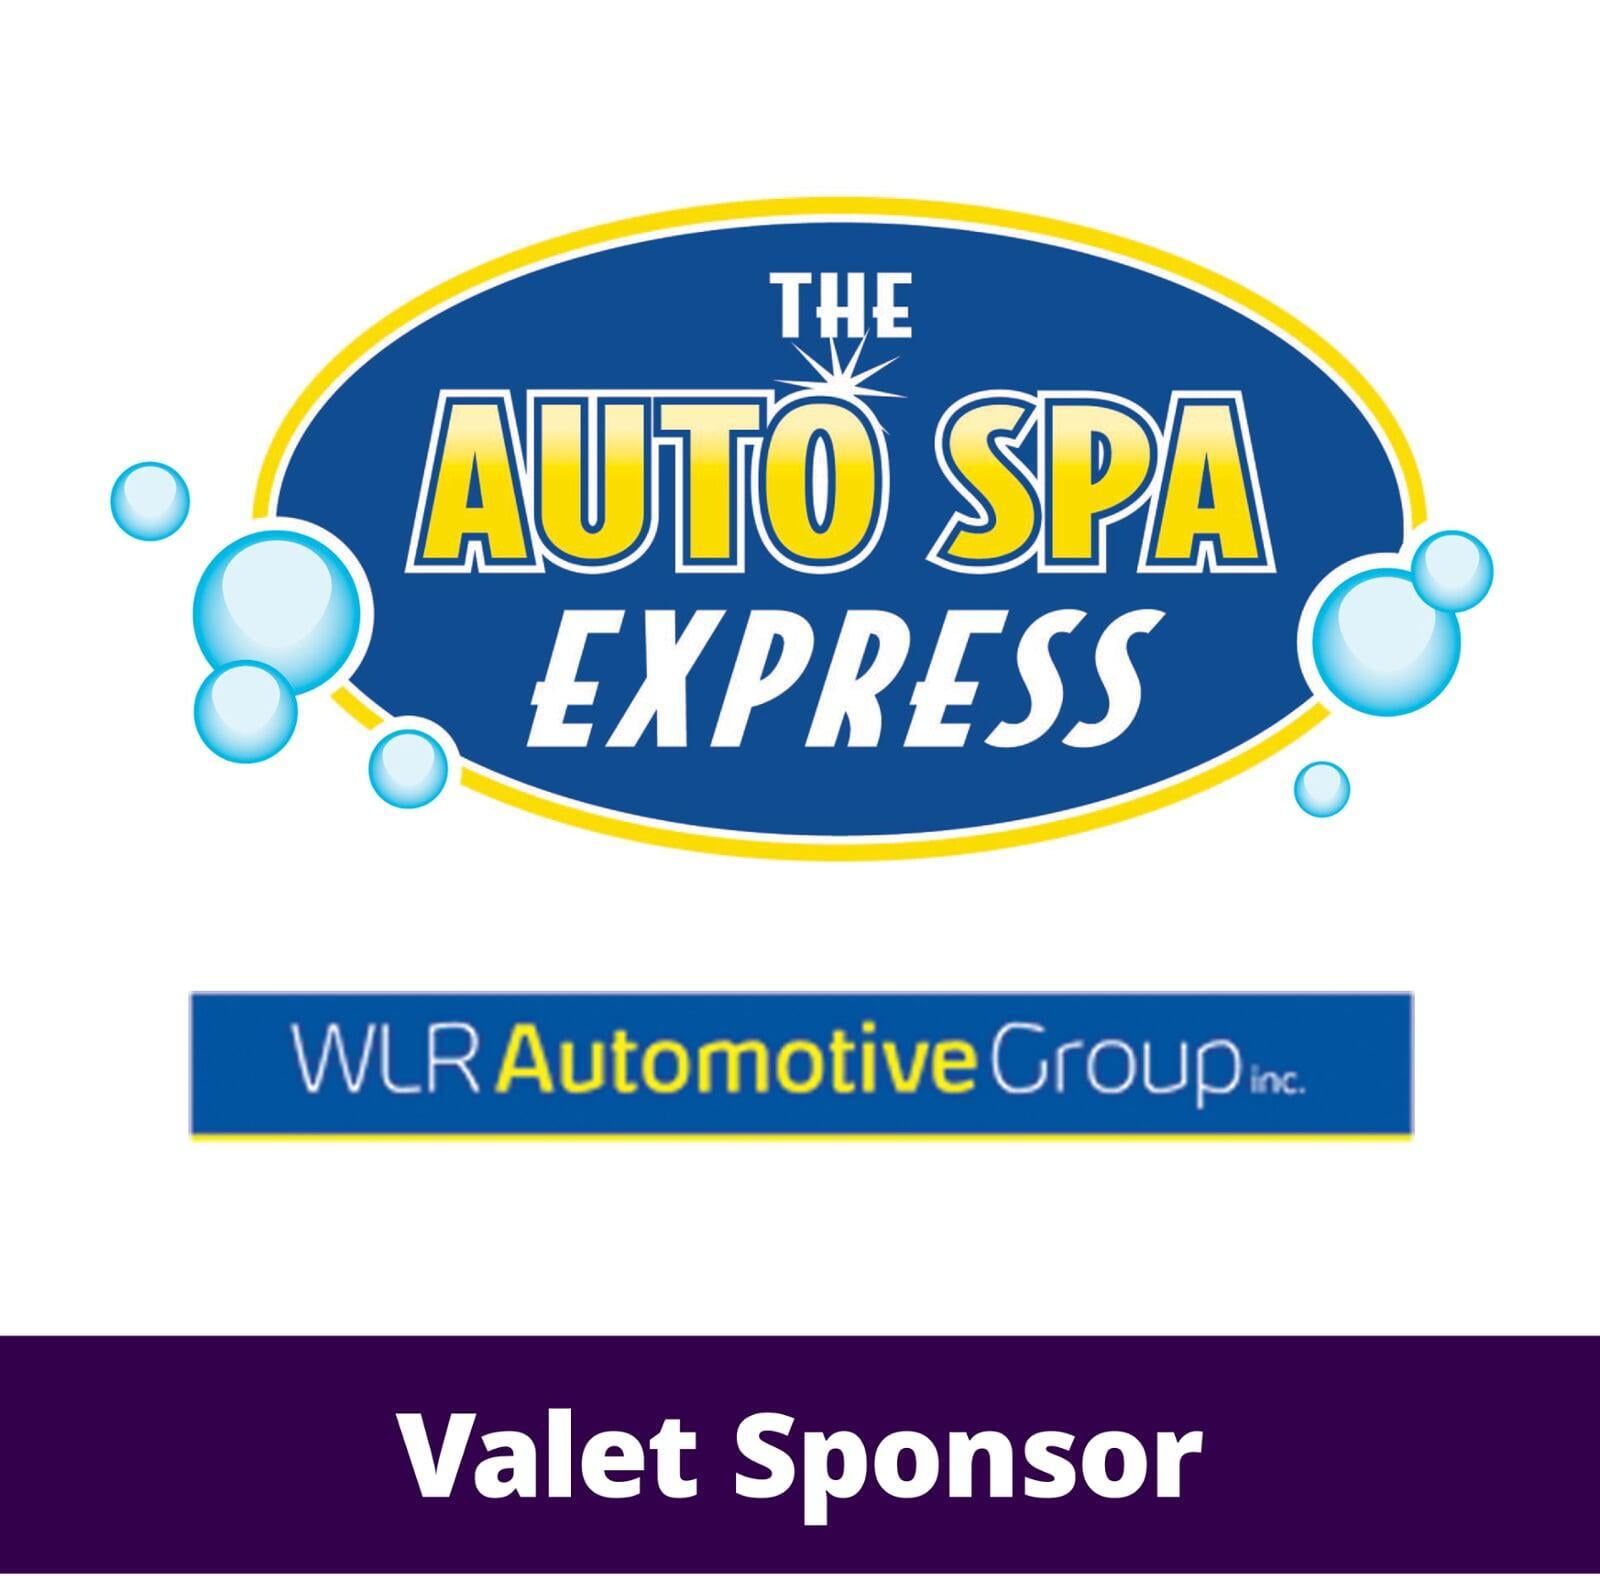 The Auto Spa Express and WLR Automotive Group Inc. logo